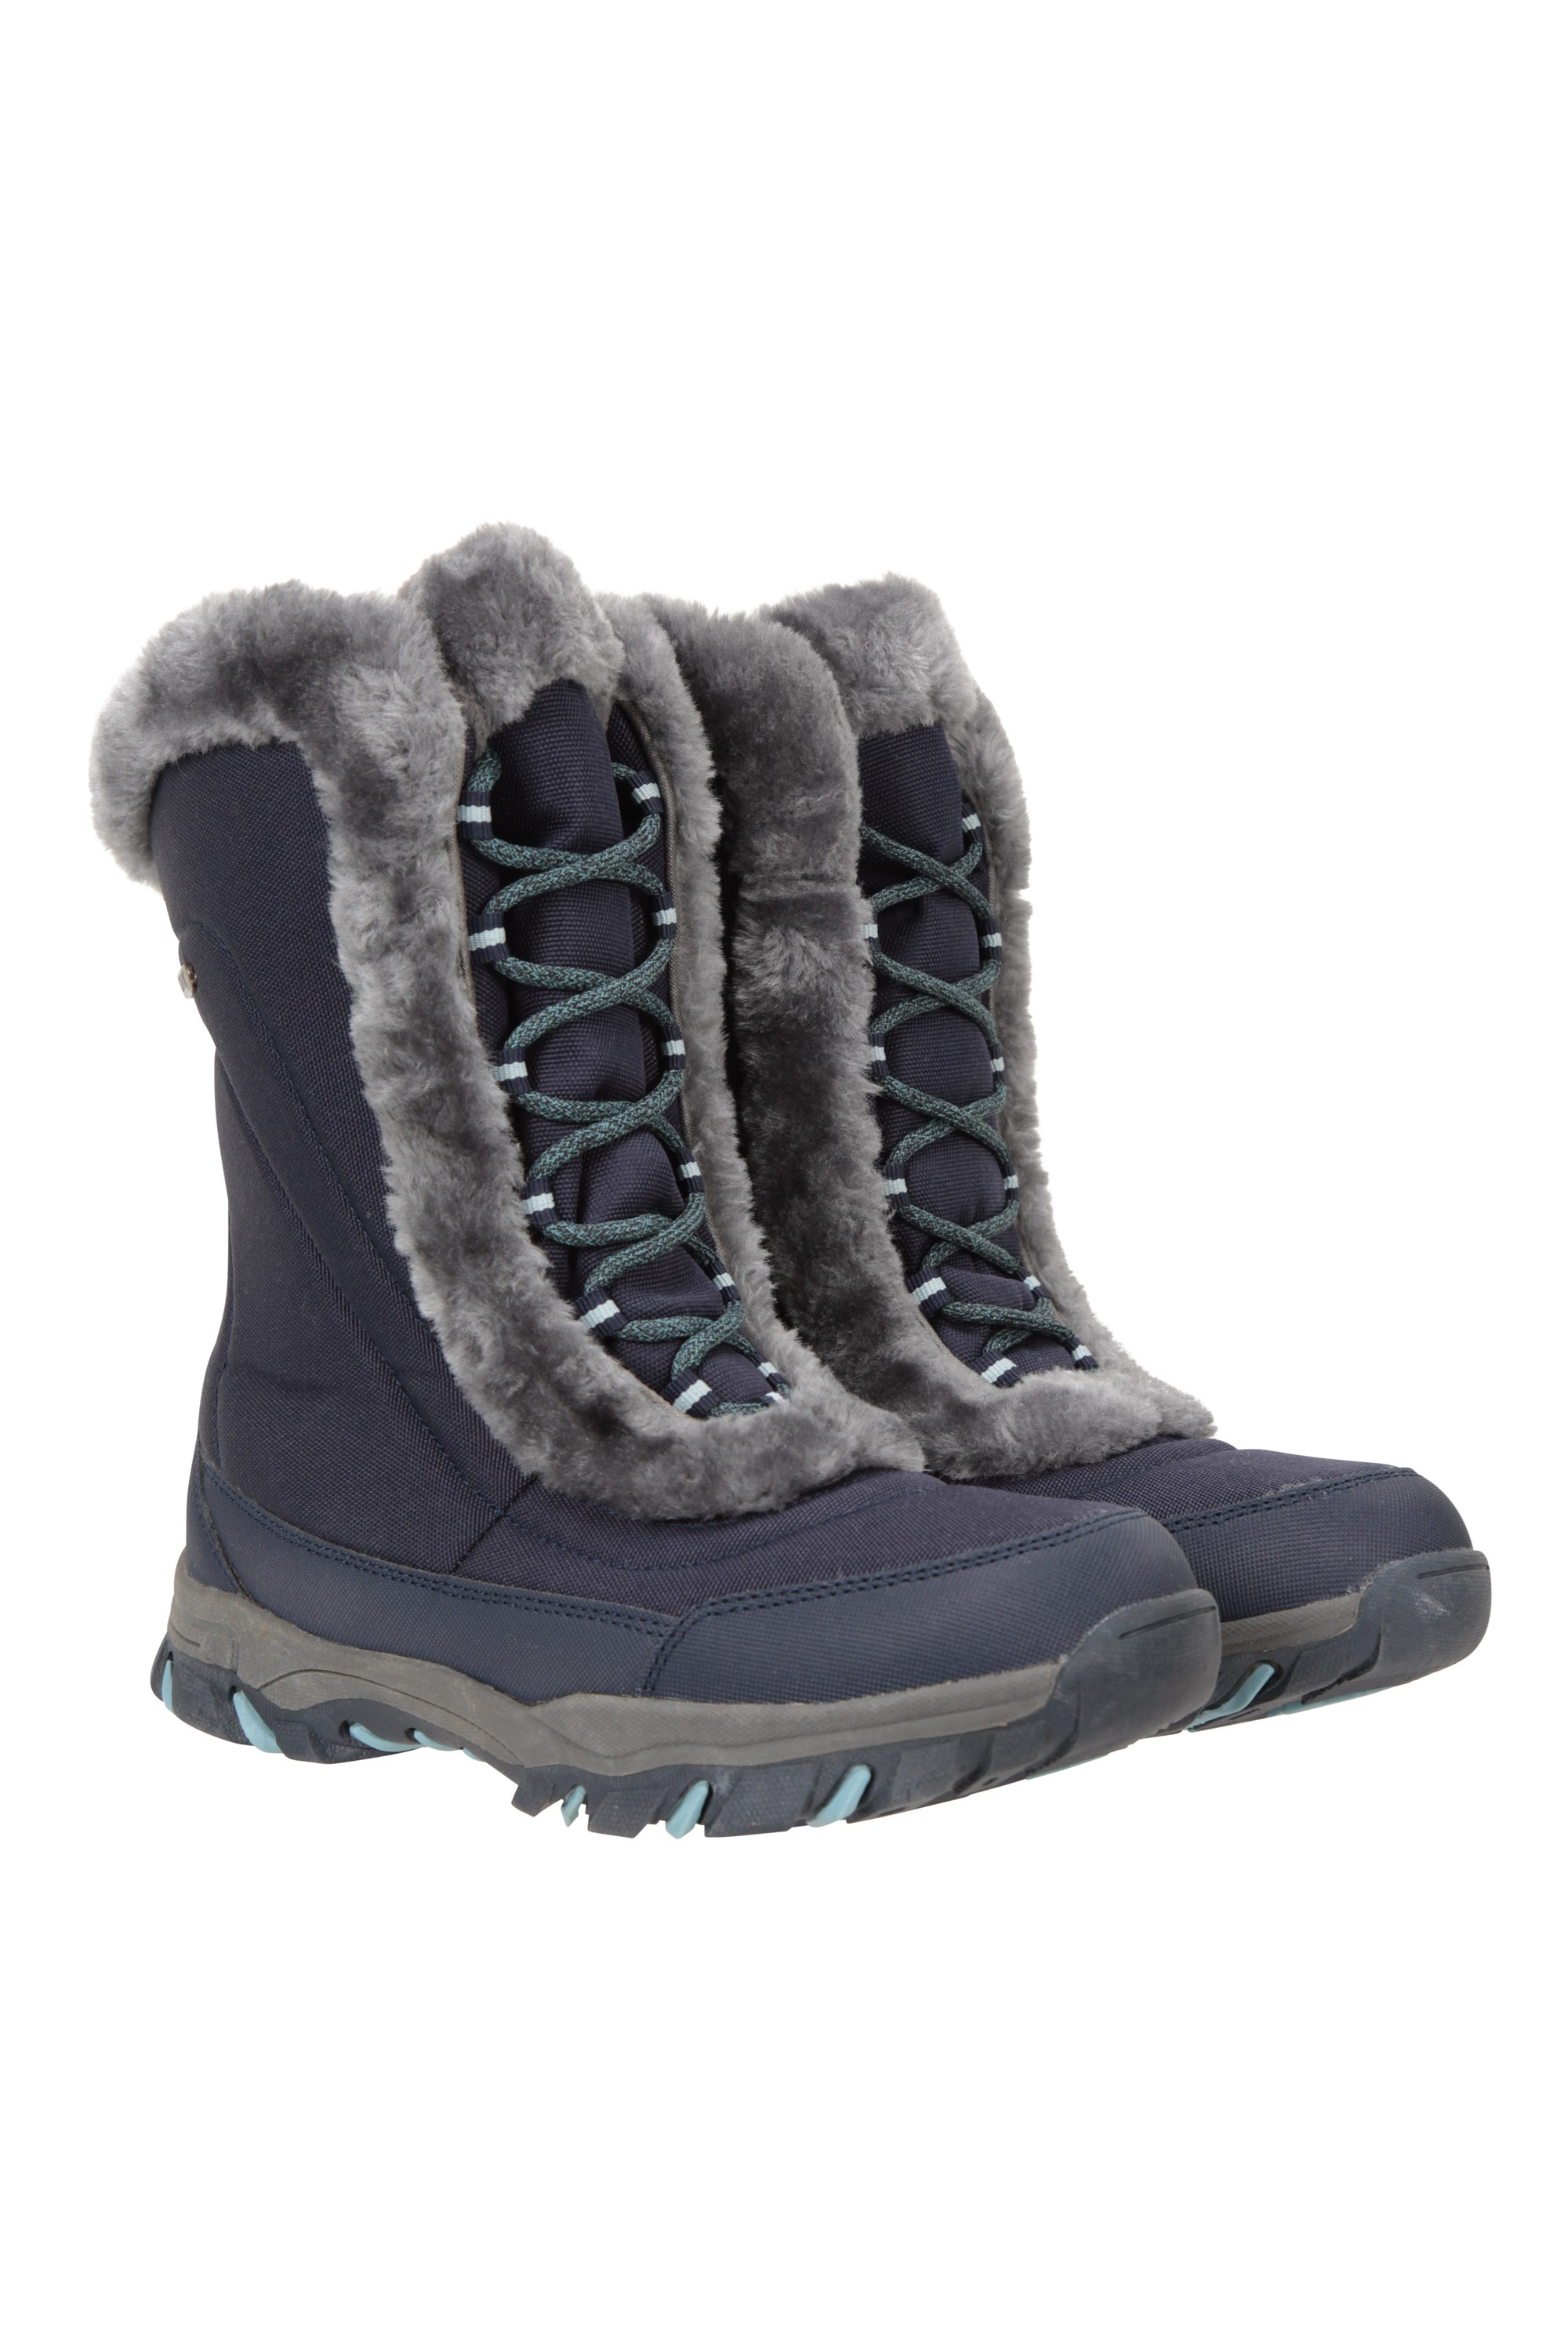 Snow Boots & Winter Boots | Mountain Warehouse US